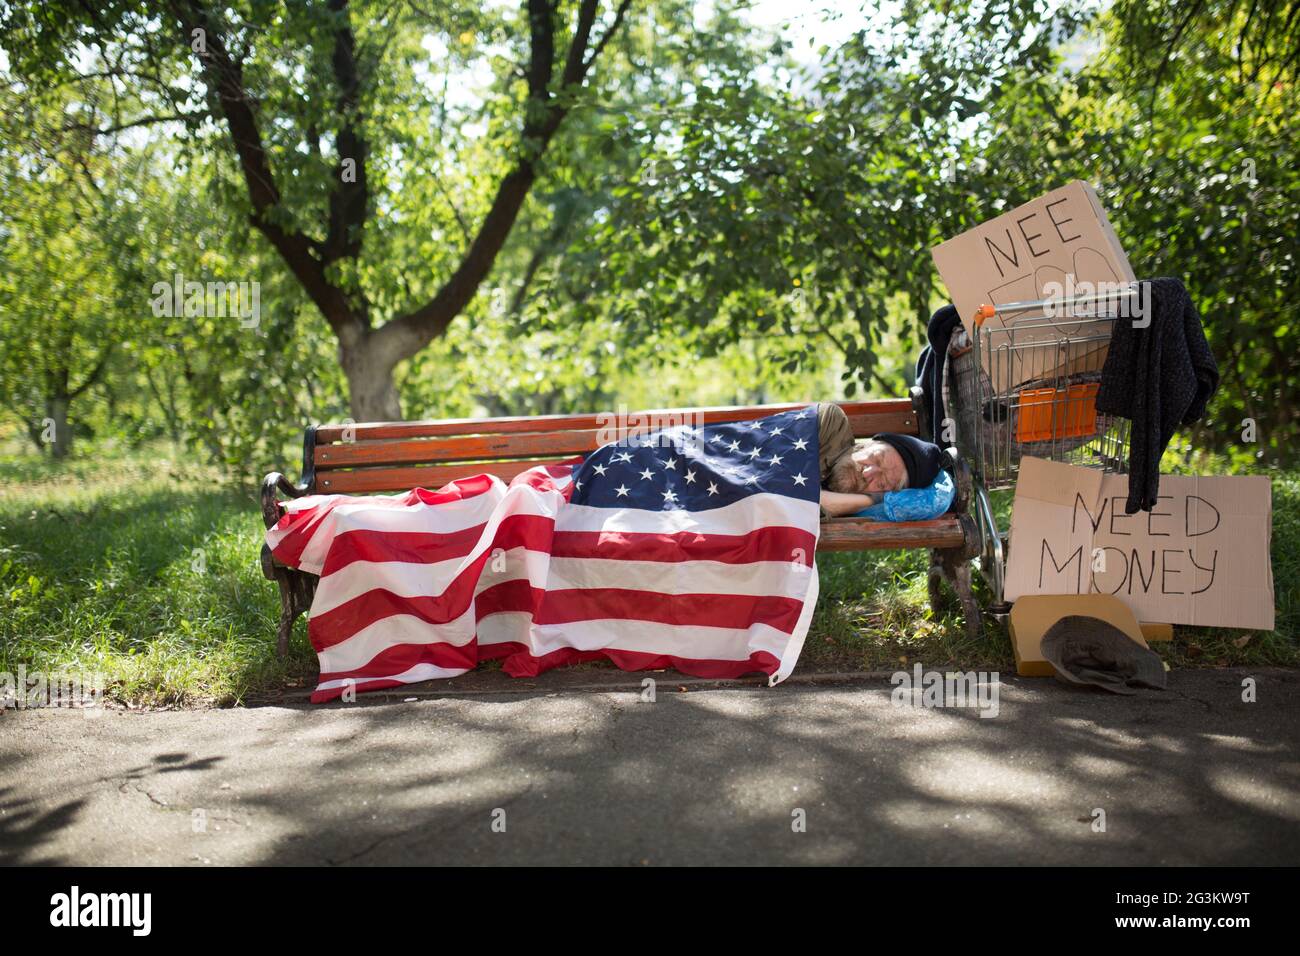 view-of-a-homeless-man-lying-on-bench-covered-with-usa-flag-2G3KW9T.jpg